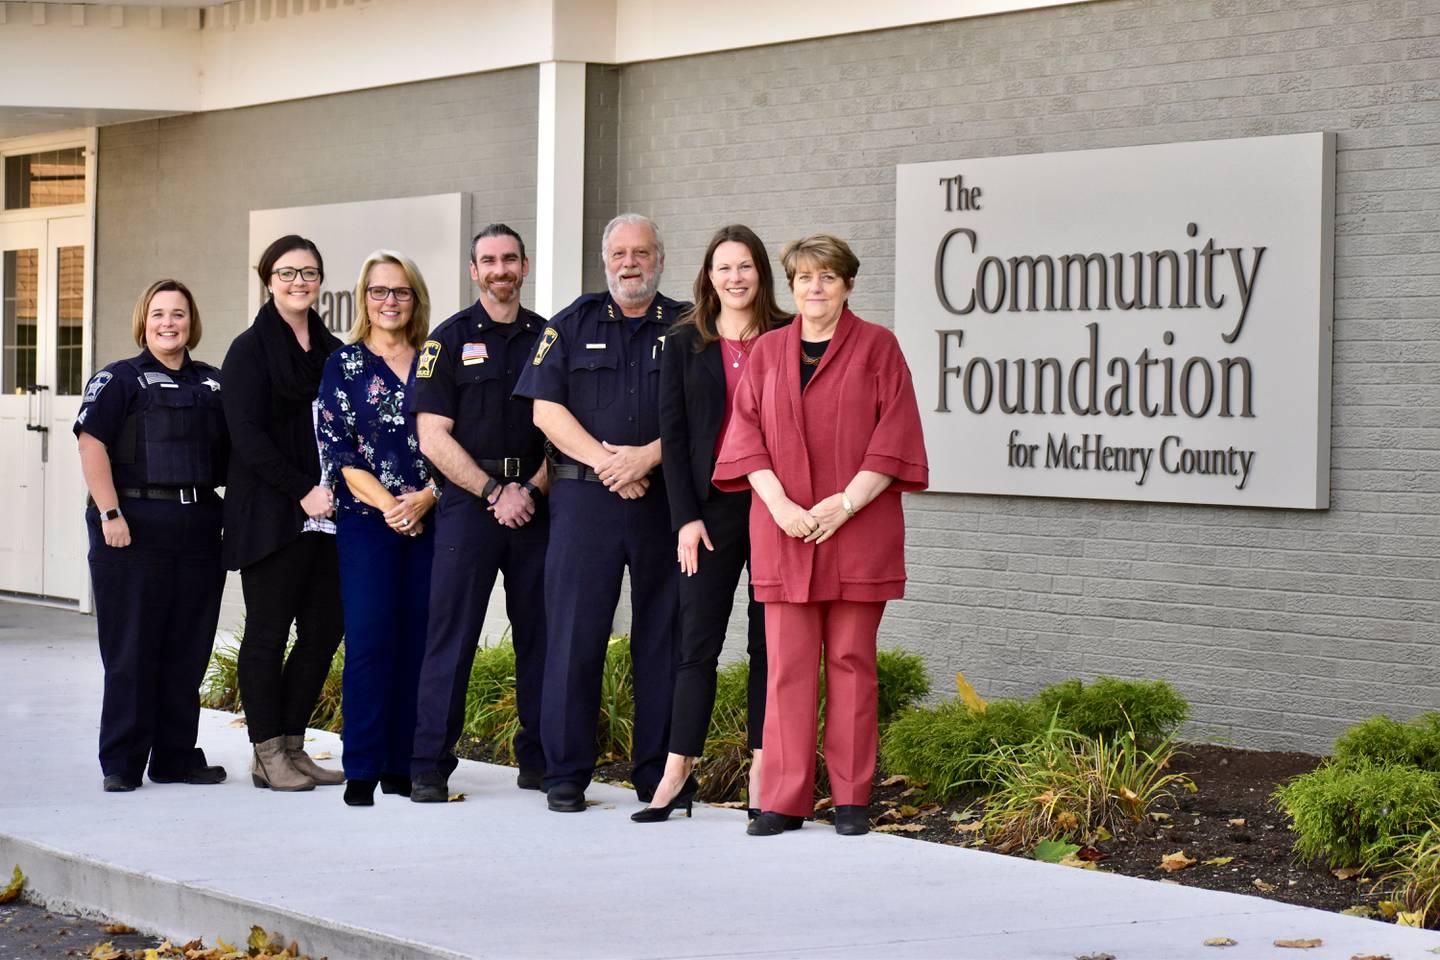 Pictured from left to right are McHenry County Sheriff's Sgt. Aimee Knop, McHenry County Police Social Worker Alana Bak, Senior Director of Community Engagement for the Community Foundation of McHenry County Marcey Sink, McHenry County Sheriff's Chief Robb Tadelman, McHenry County Sheriff Bill Prim, McHenry County Coordinator Chalen Daigle, and Executive Director of the Community Foundation for McHenry County Deborah Thielen. The group is working to start a shared social worker team between the sheriff's office and McHenry County police departments.